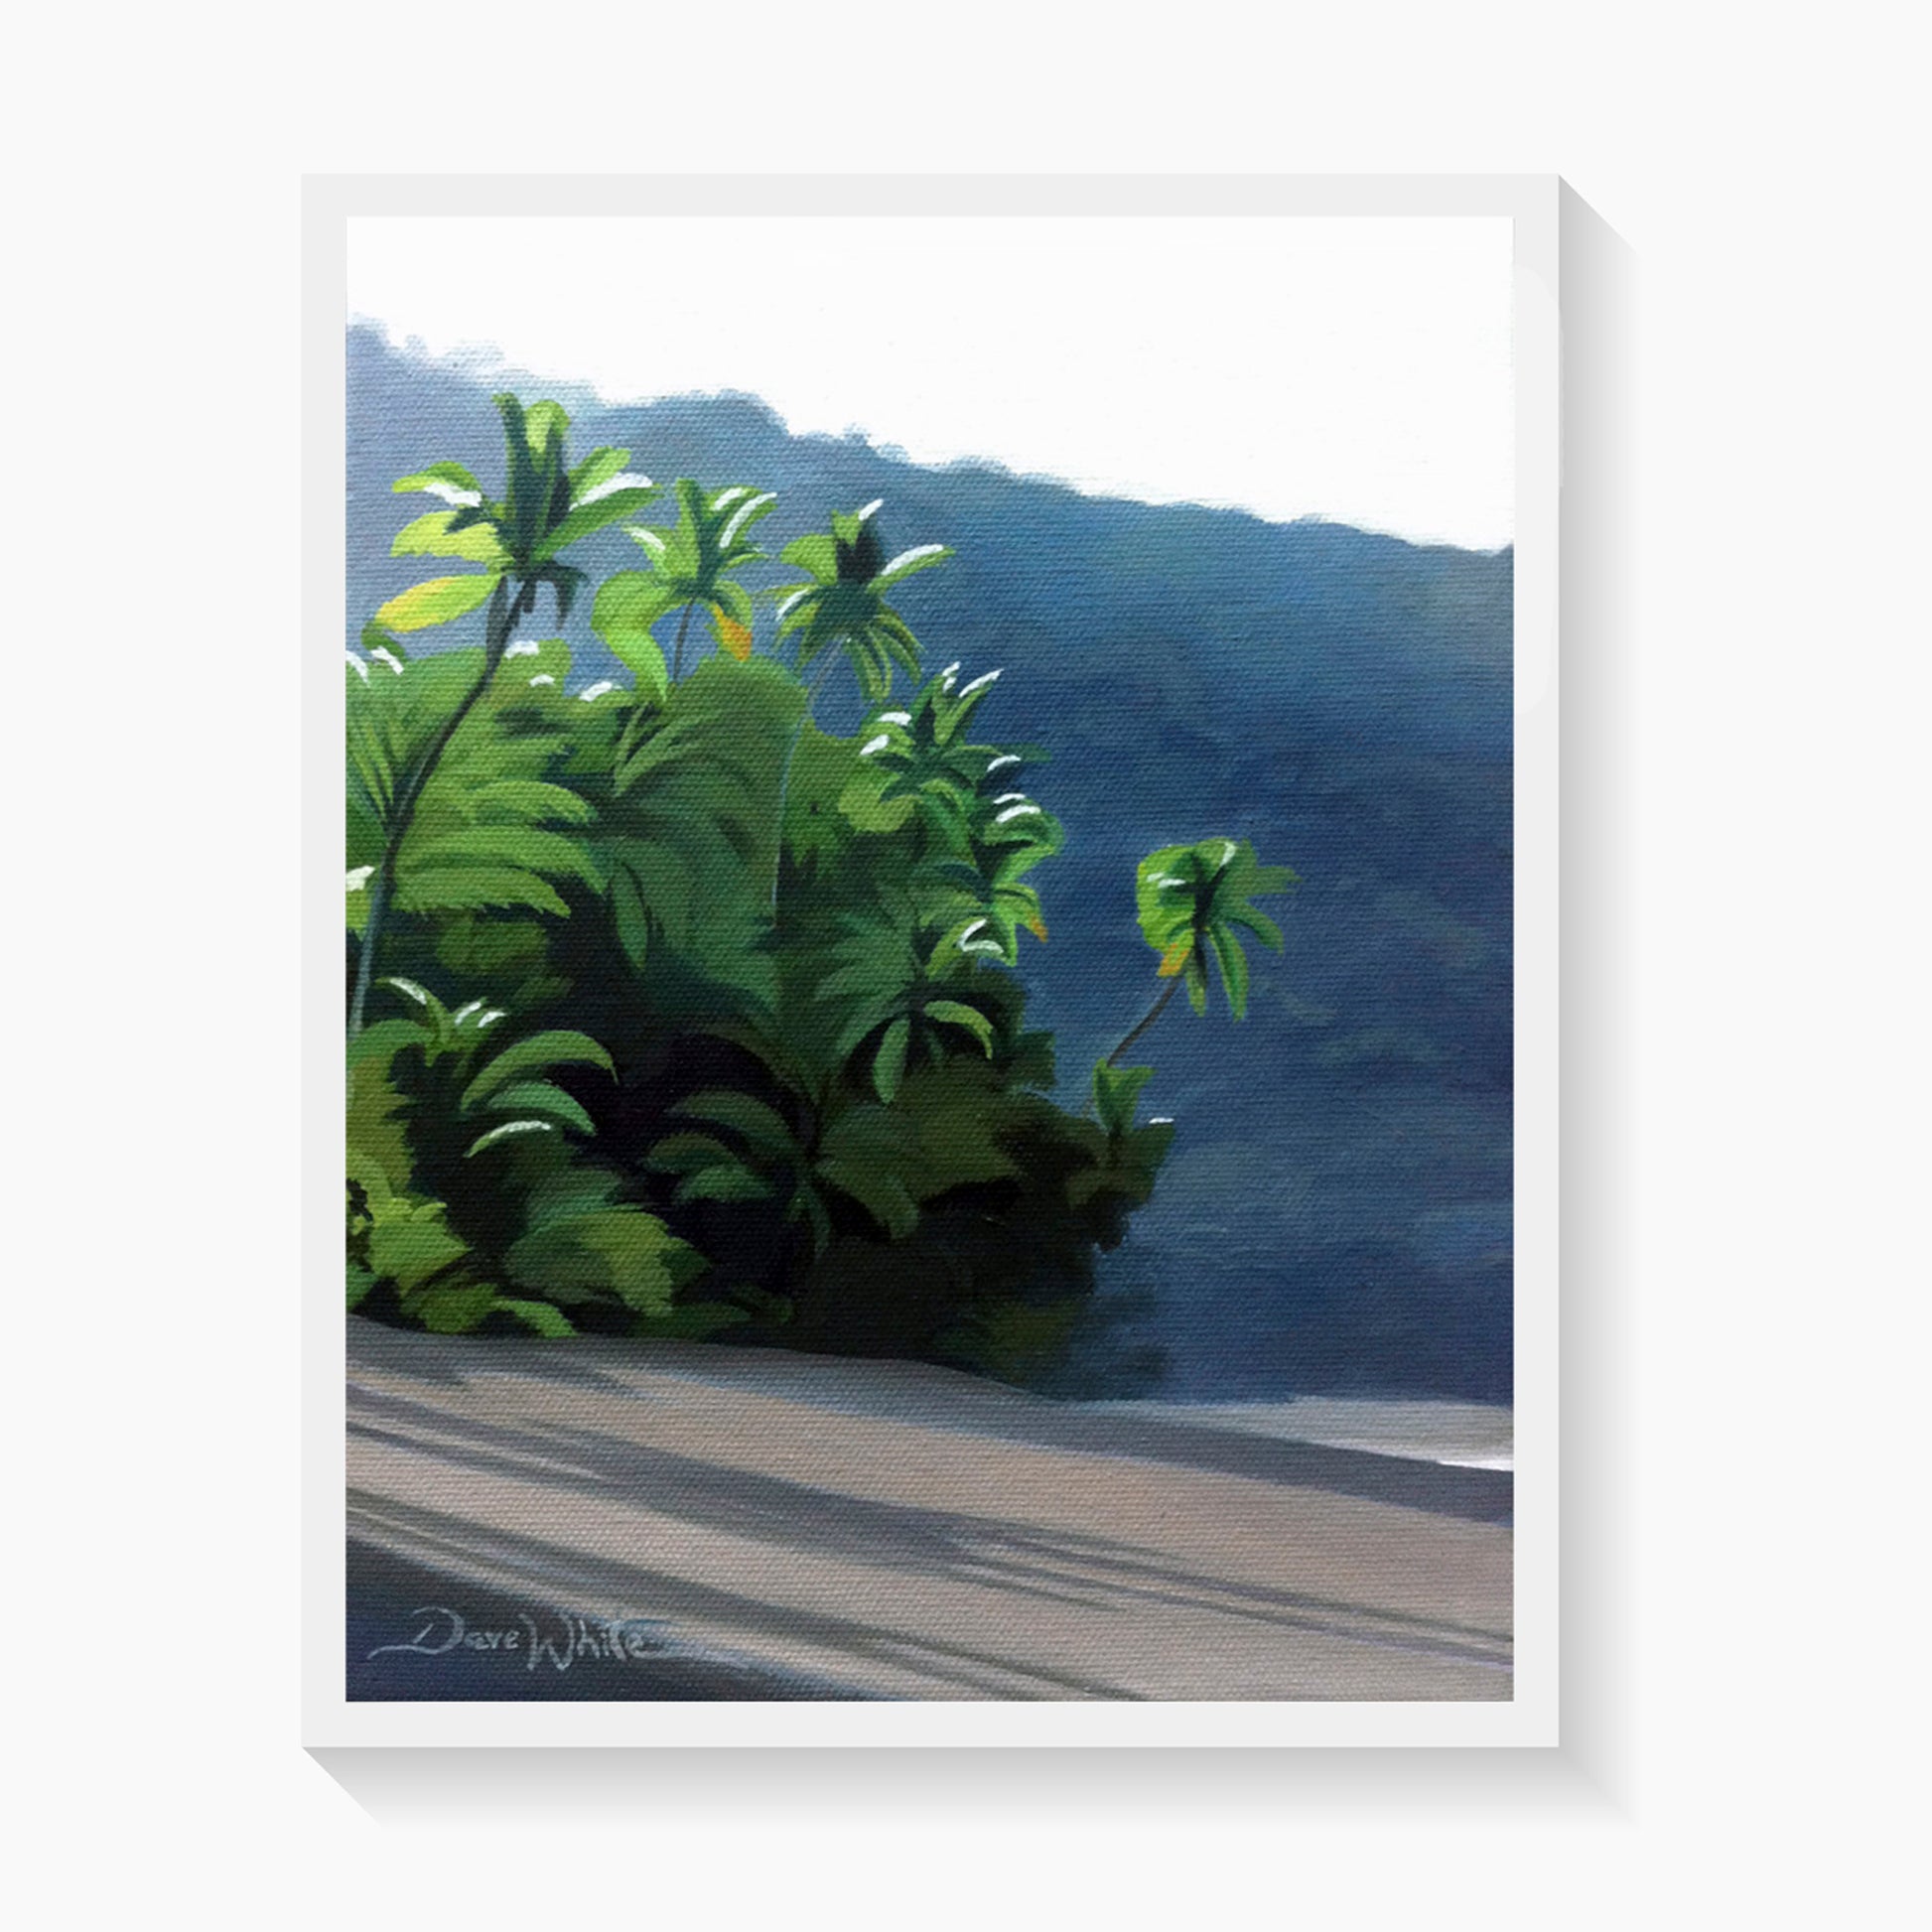 Corcovado Costa Rica Painting Art Print by Dave White